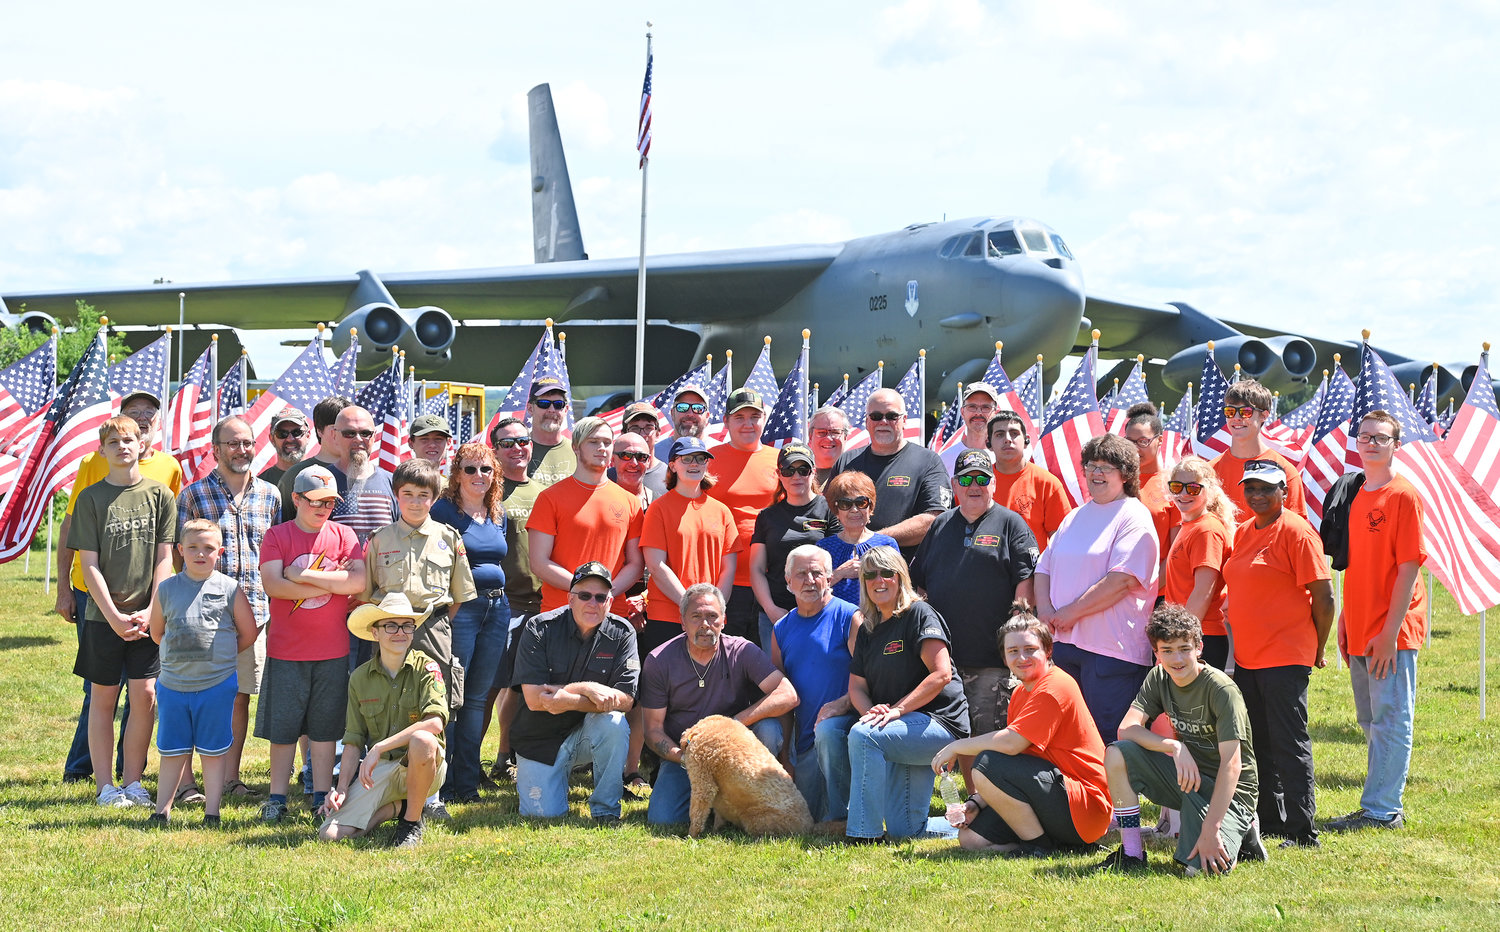 TEAM PHOTO — Volunteers responsible for putting out the more than 500 American flags that comprise the Flags of Honor display in front of the B-52 bomber pose for a group photo after their efforts in the heat and sunshine.